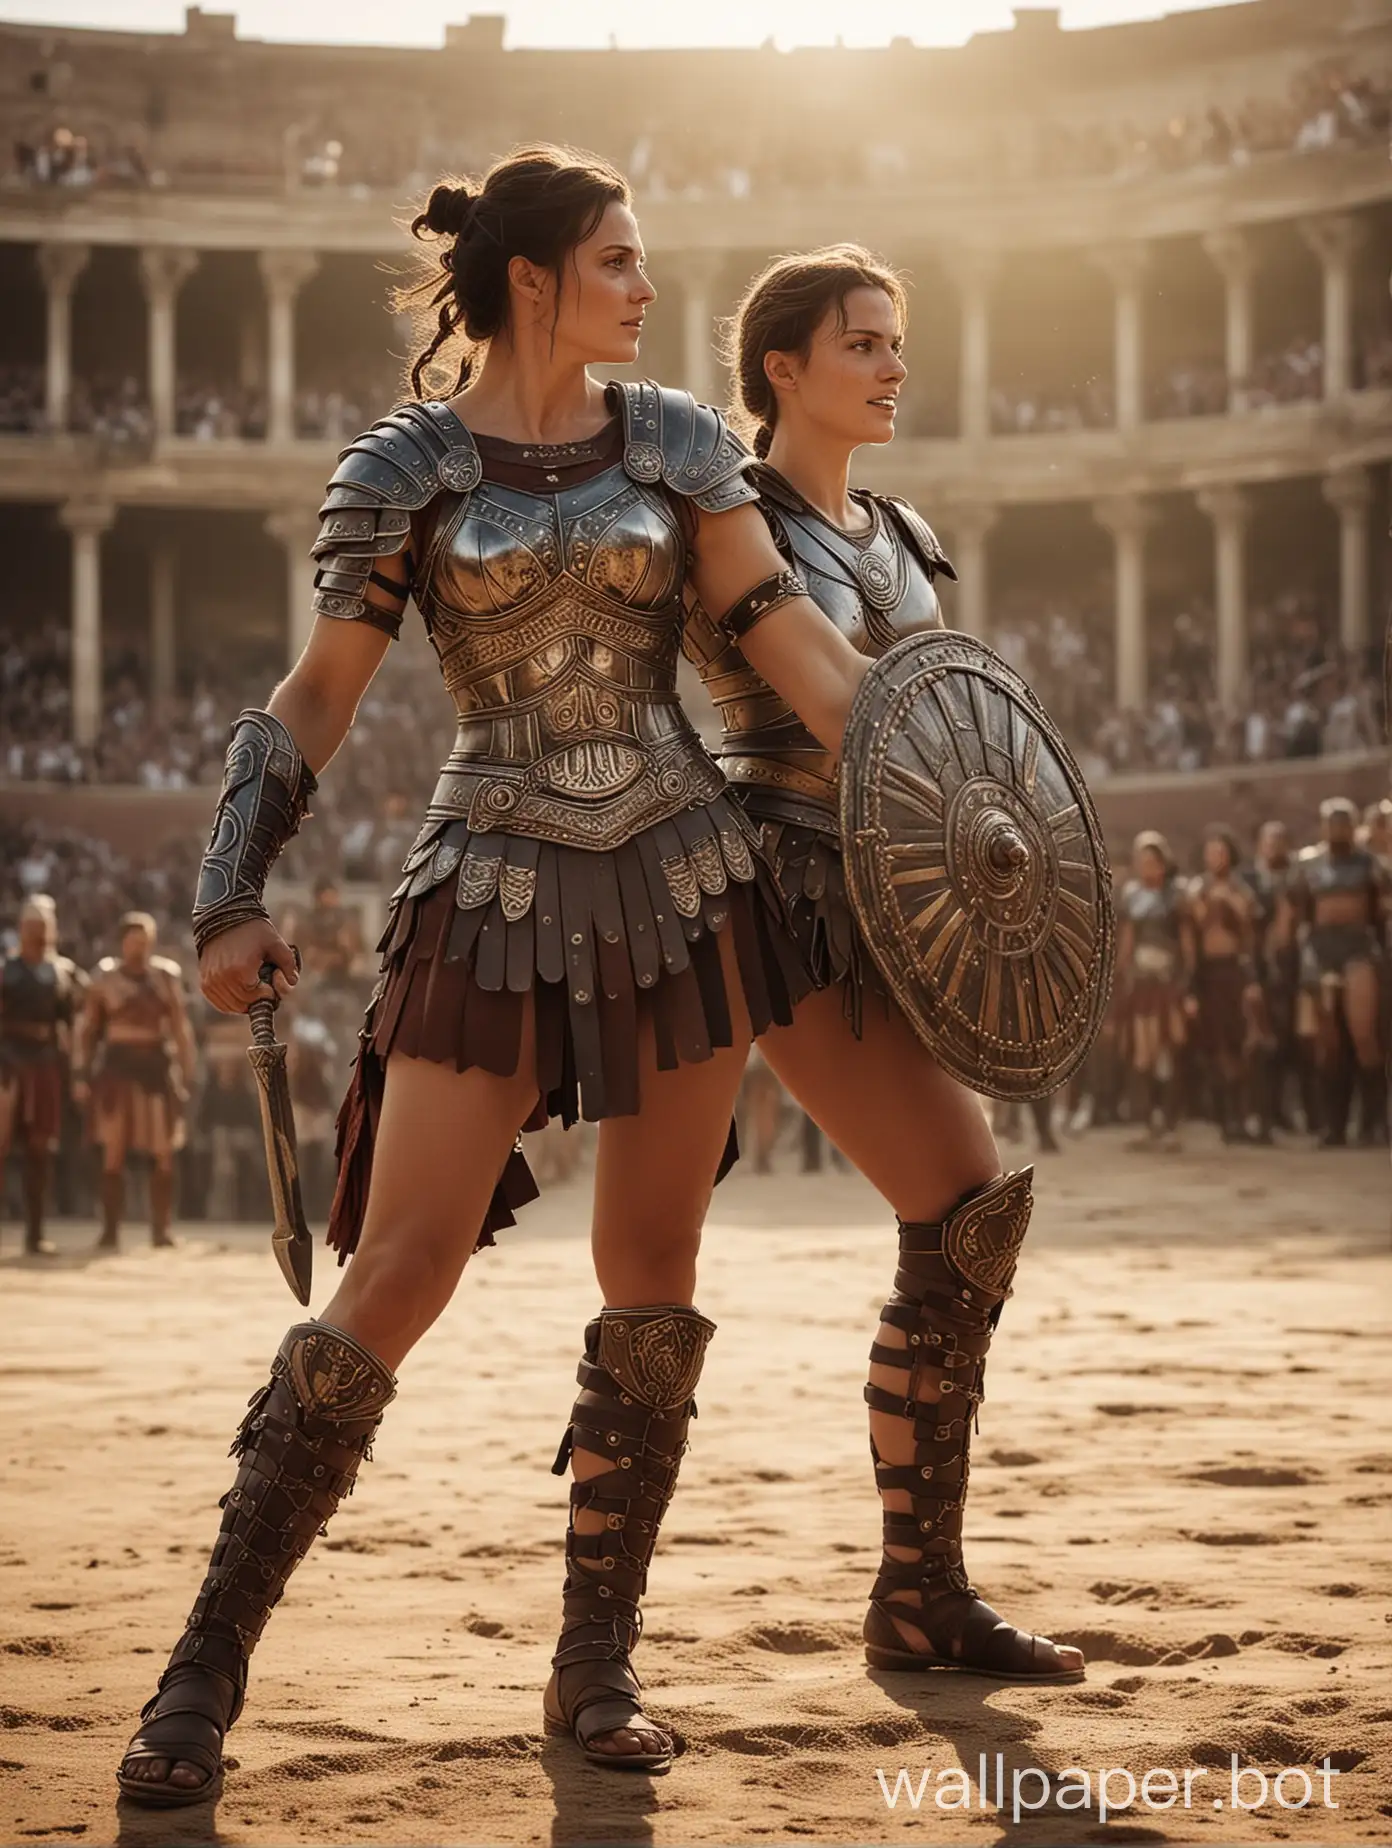 A stunning cinematic photo set in a brightly lit, ancient gladiatorial arena. A beautiful, mature, and muscular female gladiator triumphs over her defeated opponent. She stands in a victorious pose, with one leg on the chest of her rival, exuding both strength and confidence. Her armor is adorned with intricate designs, and her triumphant smile radiates a glint of evil satisfaction. The background reveals a cheering crowd, and the atmosphere is intense and electrifying., cinematic, photo